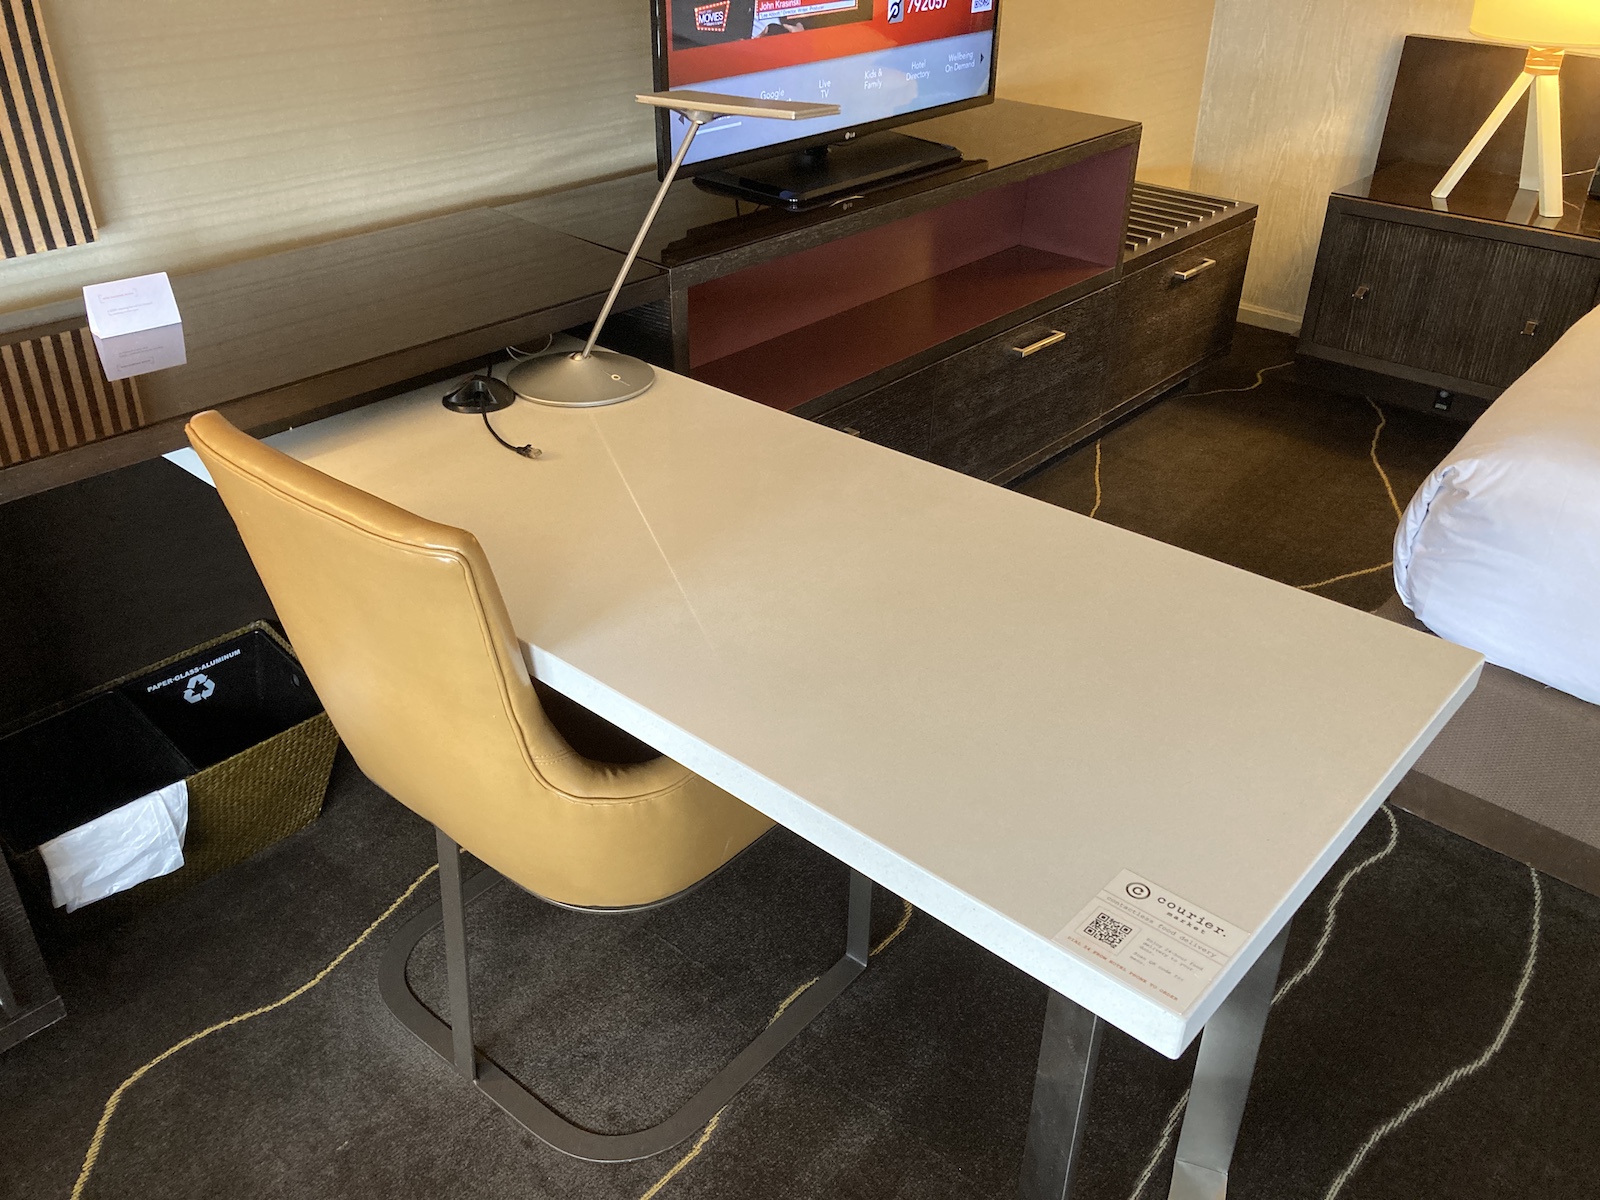 Grand Hyatt Denver Review – Downtown Hotel With Many Positives